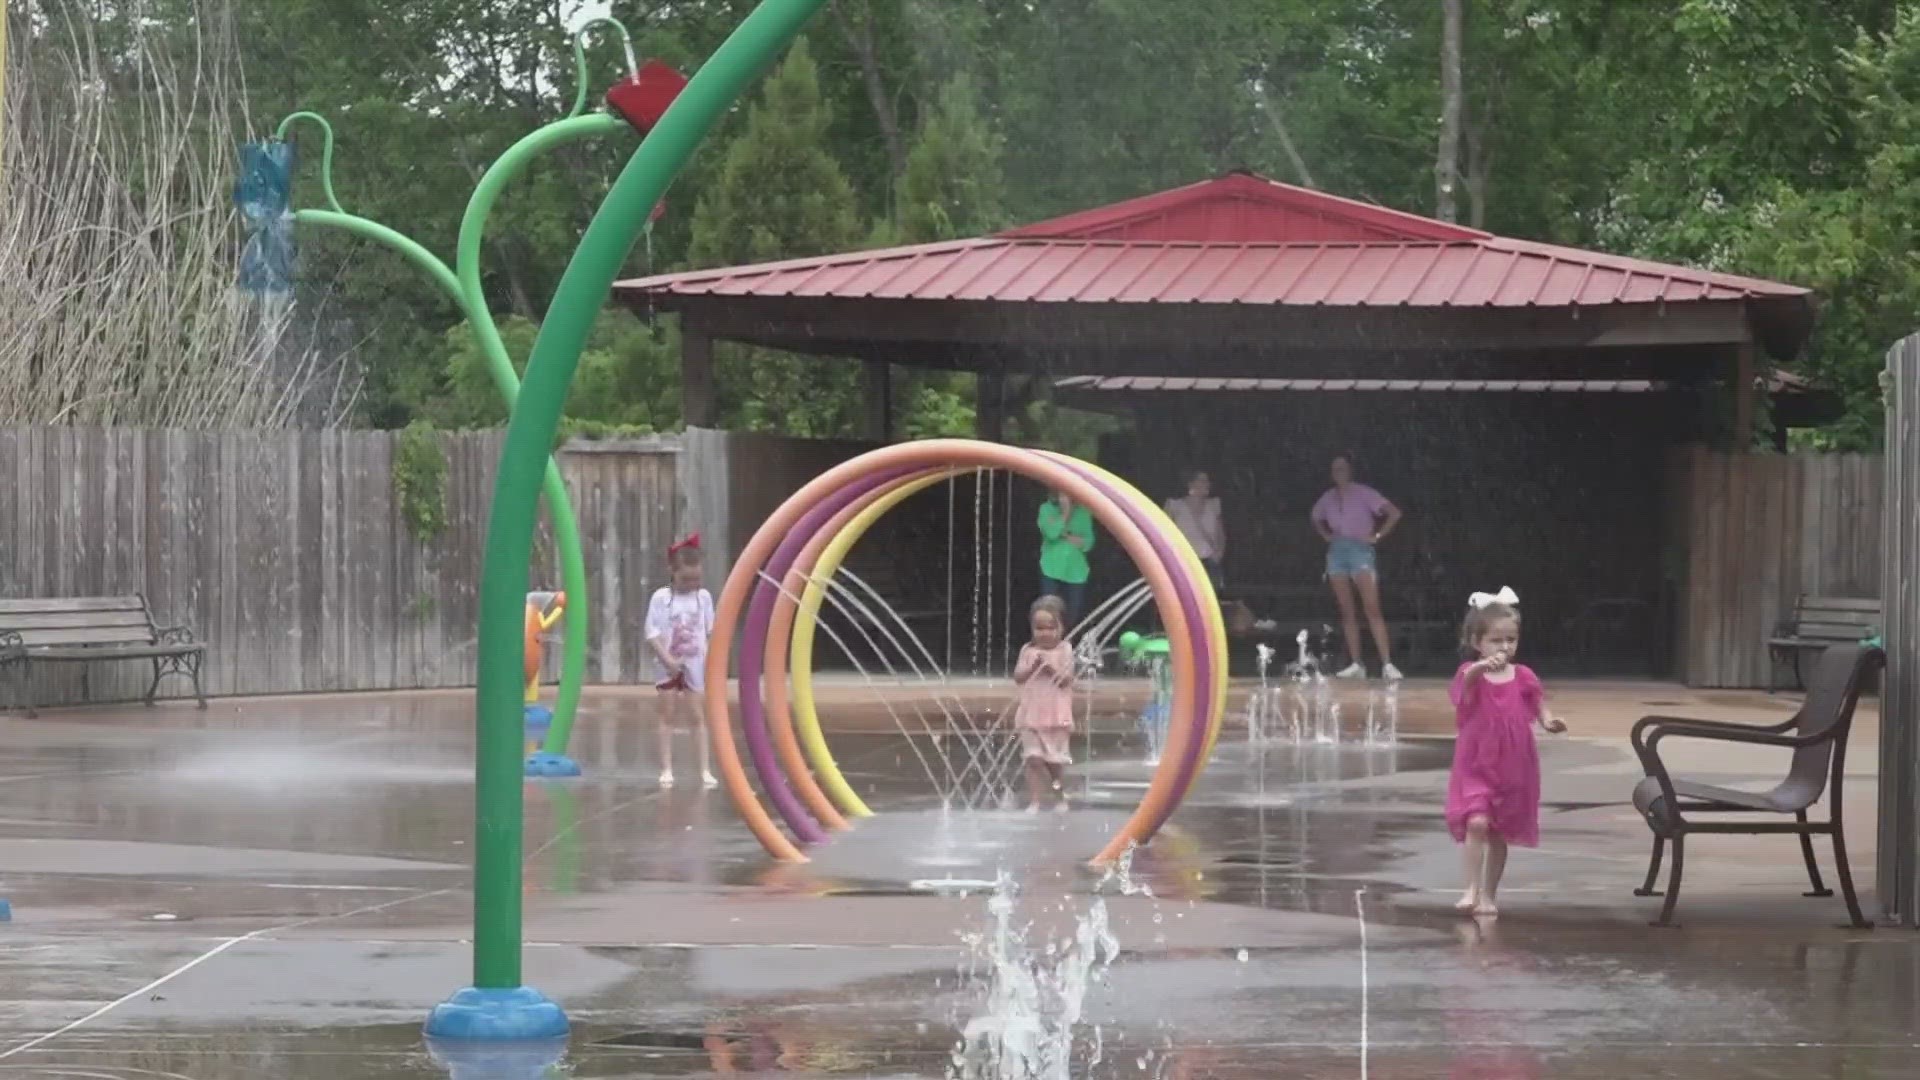 This includes a splash pad near Zoo Knoxville now open to the public.